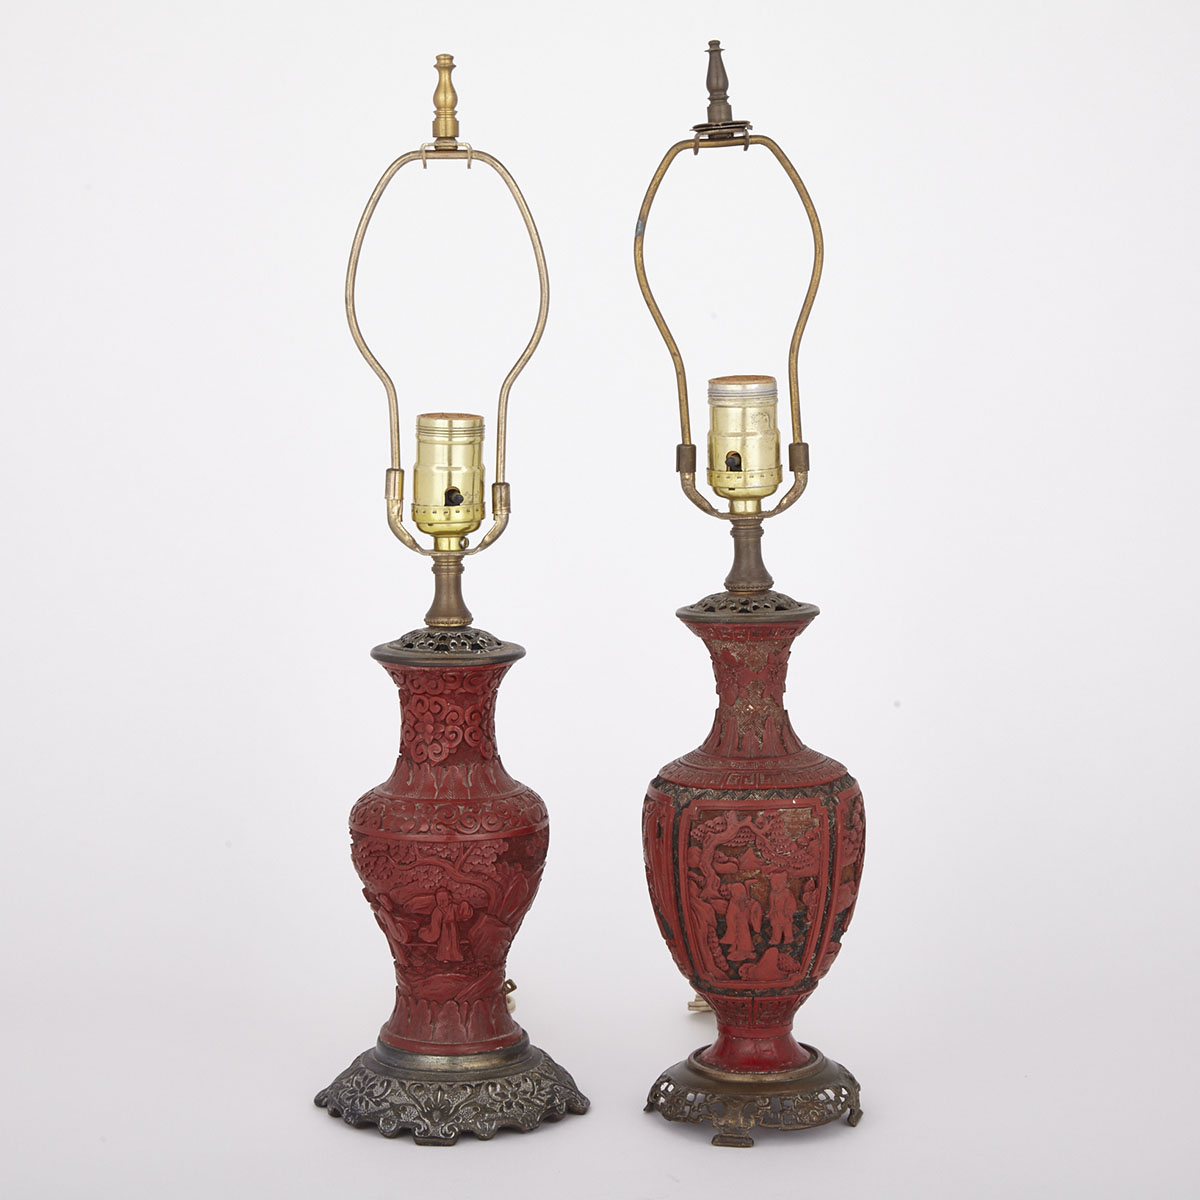 Matched Pair of Cinnabar Lacquer Lamps, Late 19th Century